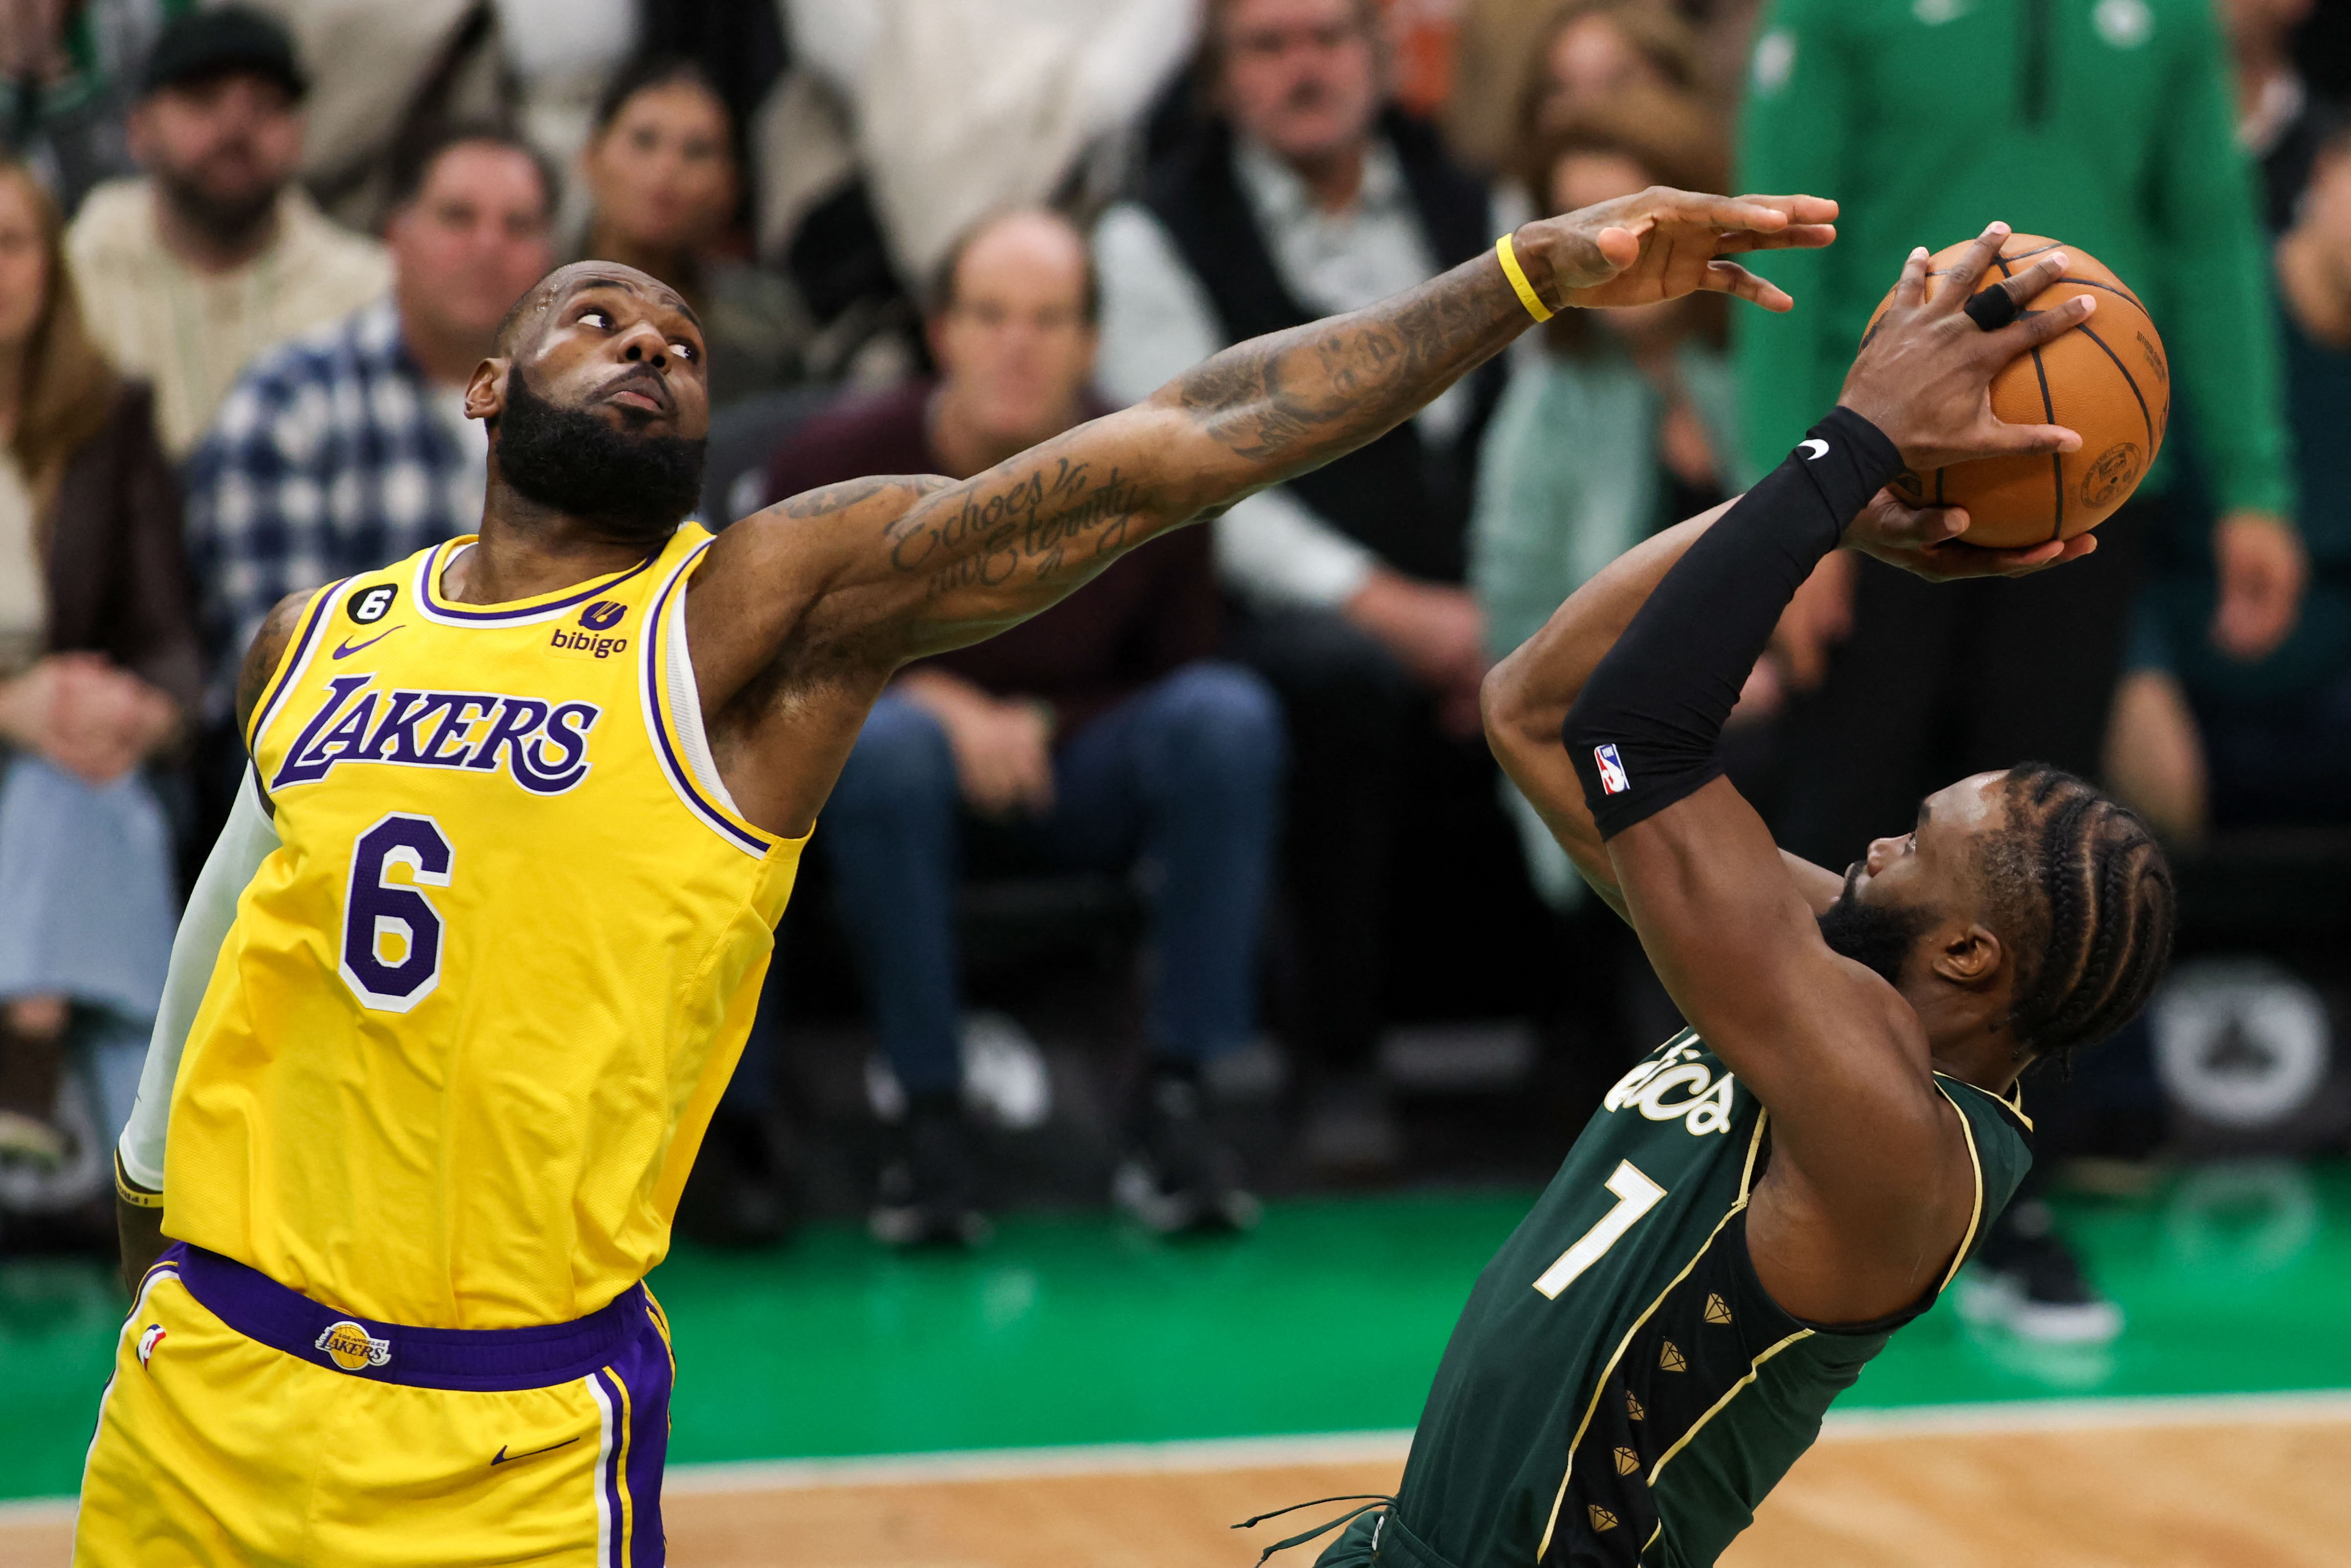 Lakers cry foul after refs' blunder helps Celtics escape with overtime win